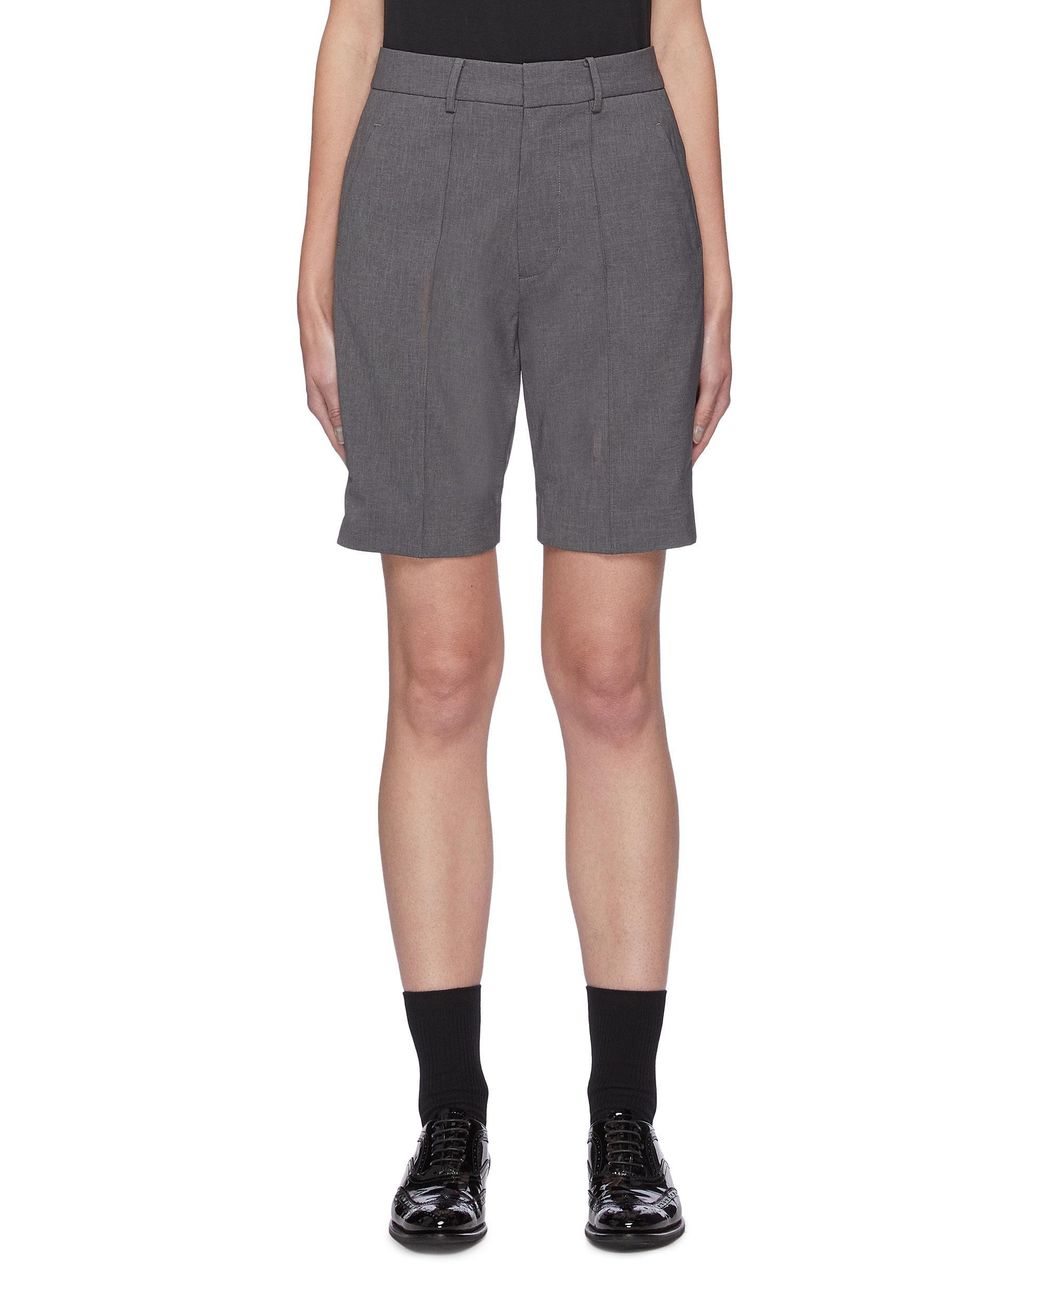 ShuShu/Tong Synthetic Slim Tailored Shorts in Grey (Gray) - Lyst